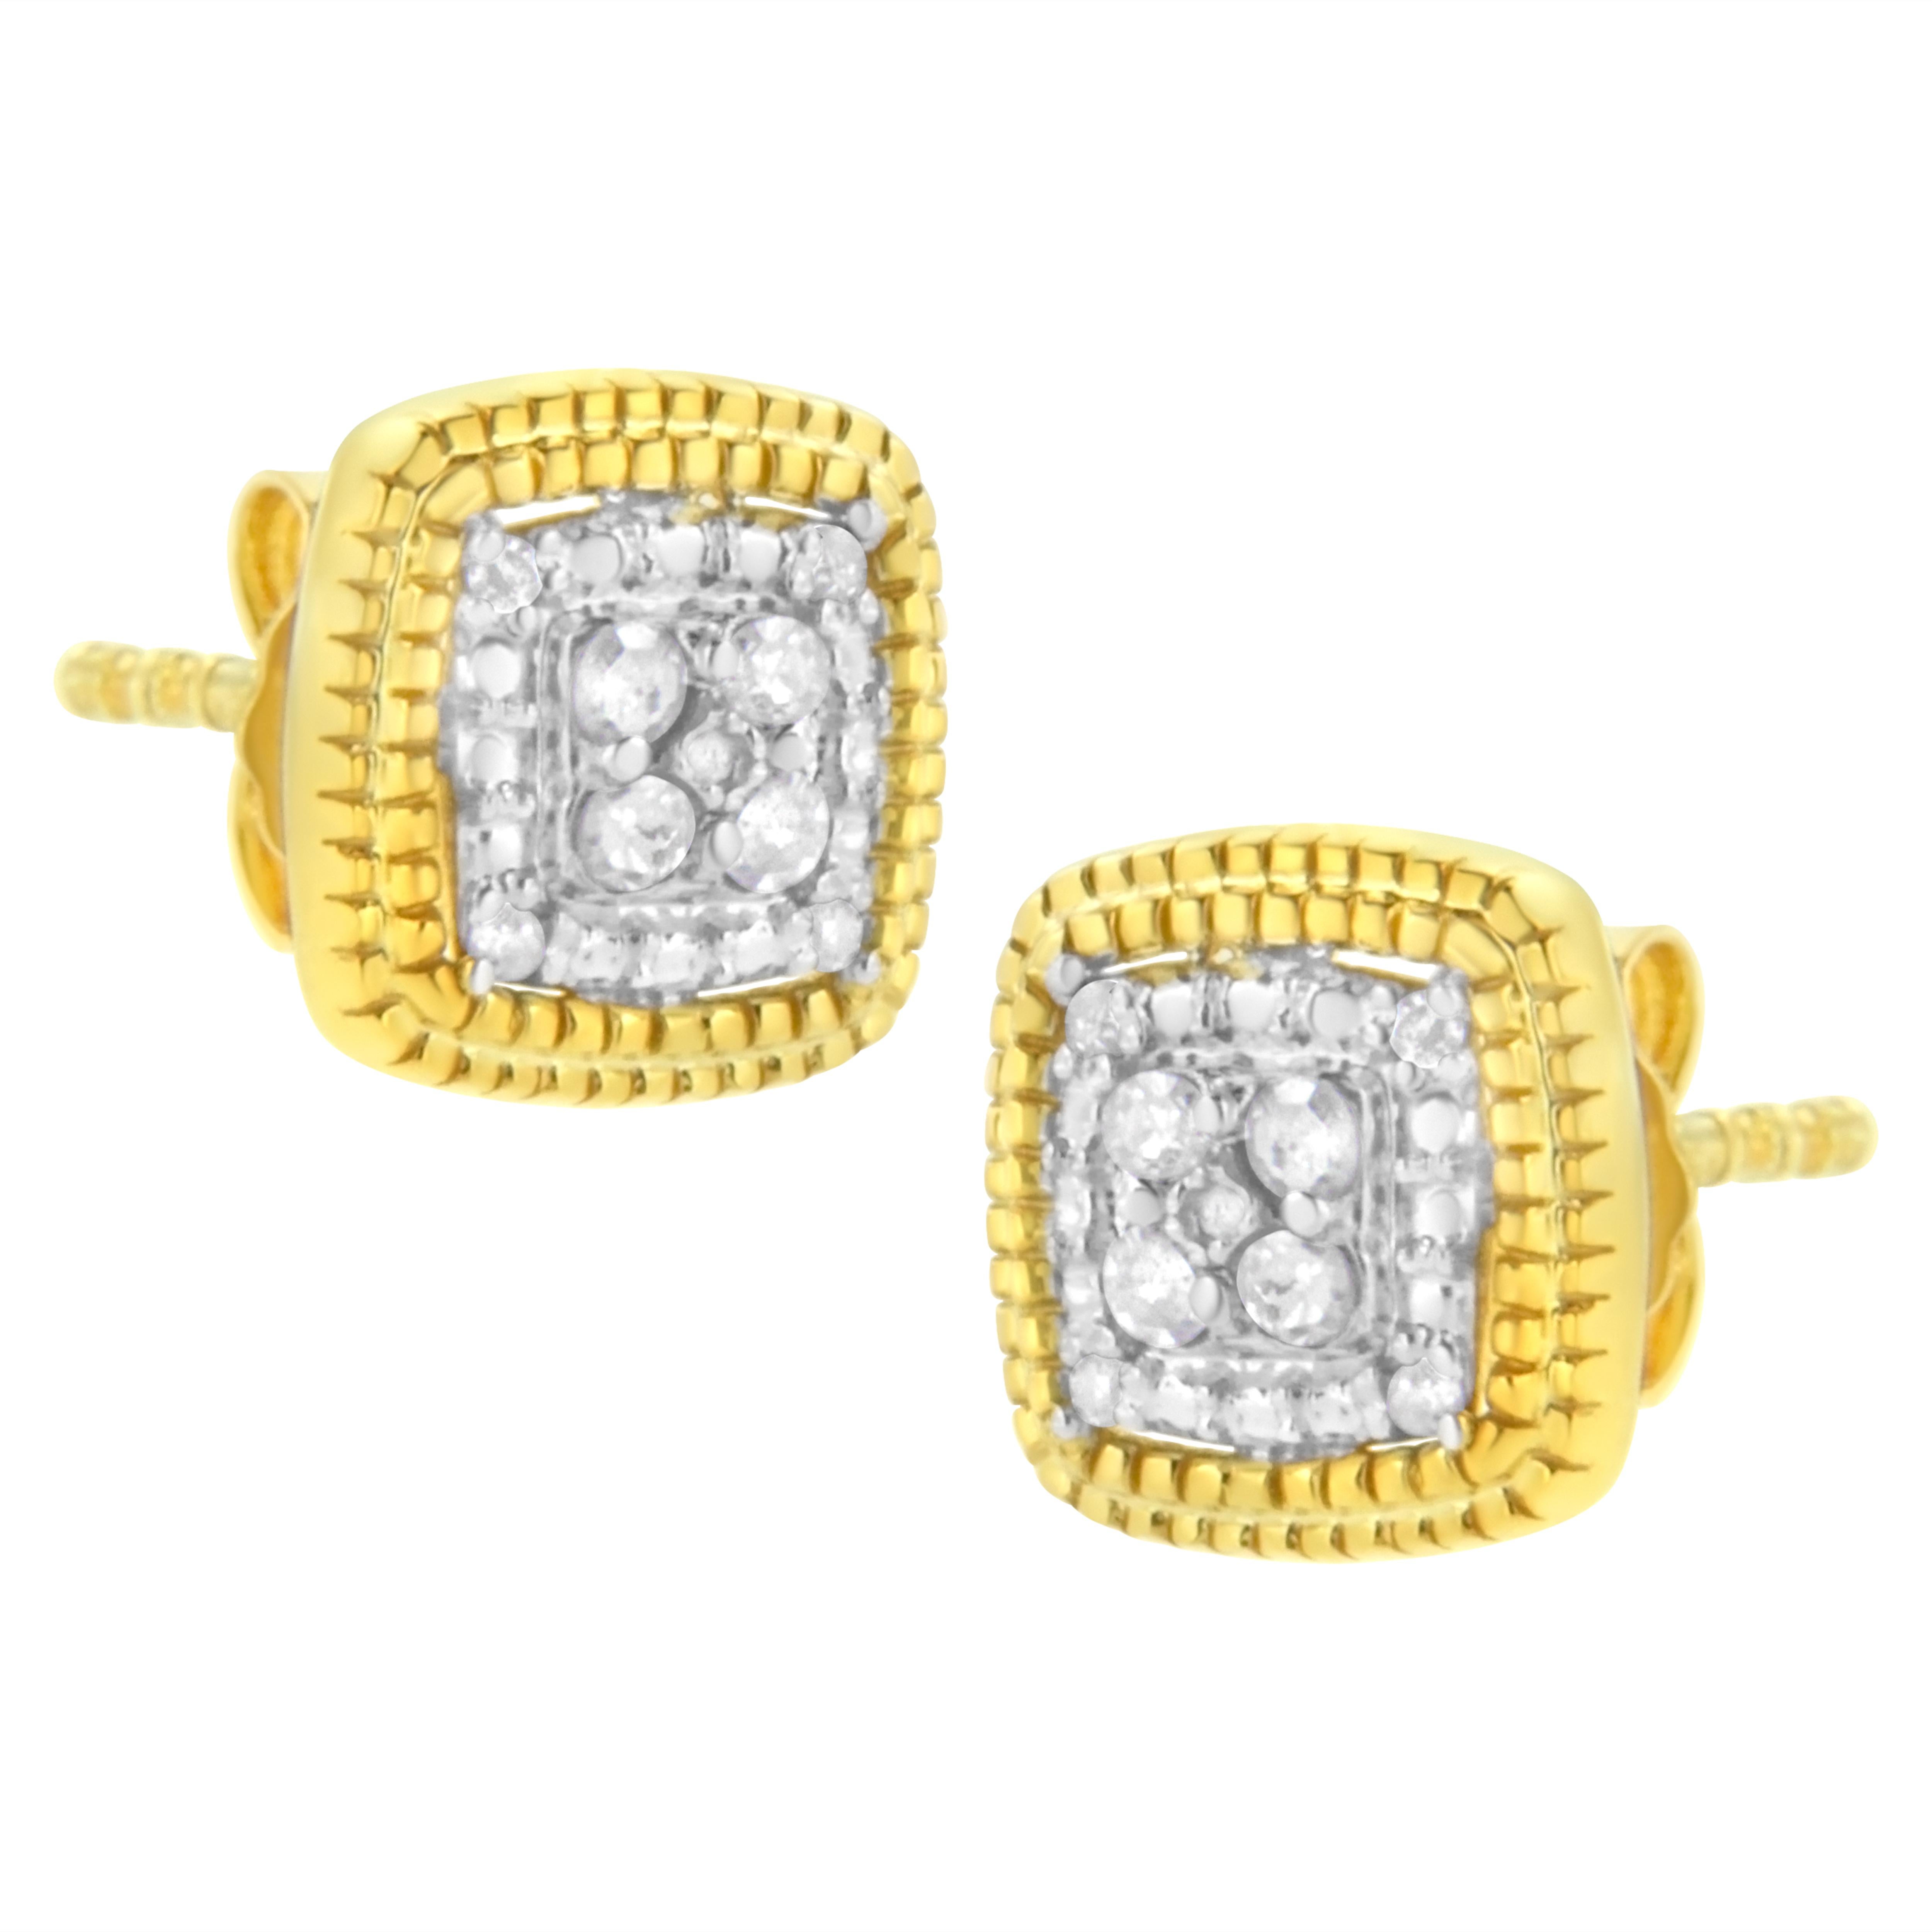 Contemporary Yellow Gold Plated Sterling Silver 1/10 Carat Diamond Milgrain Halo Stud Earring